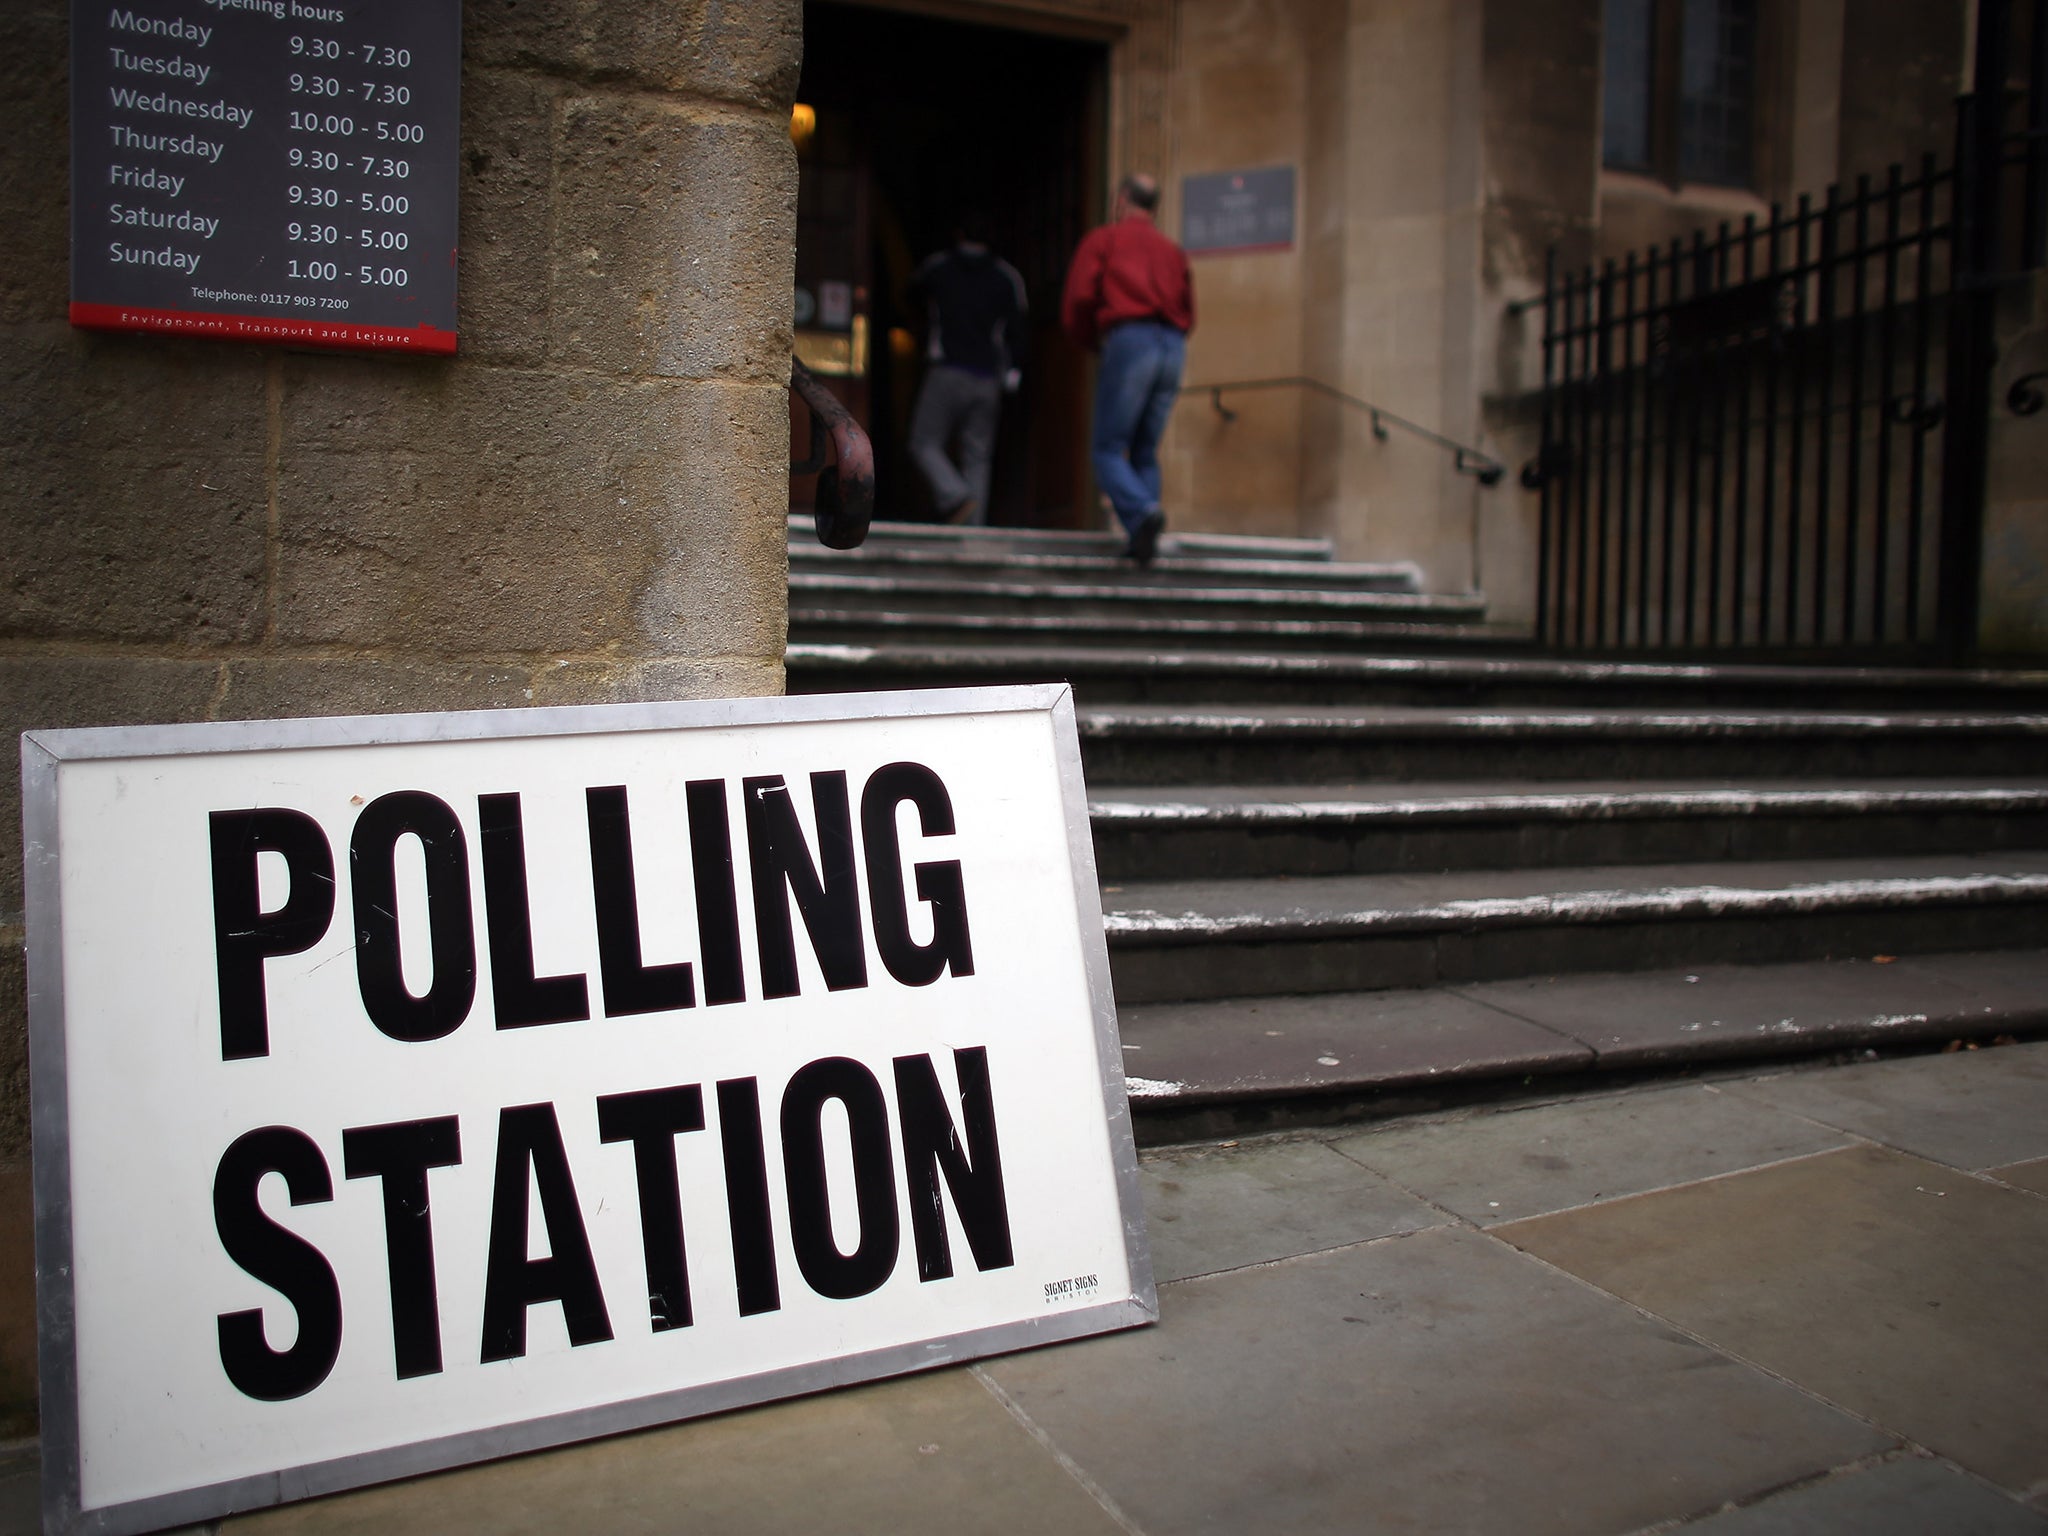 The Independent on Sunday carried out a similar polling exercise in April 2010, in which eight out of eight pollsters predicted a Conservative overall majority (Getty)